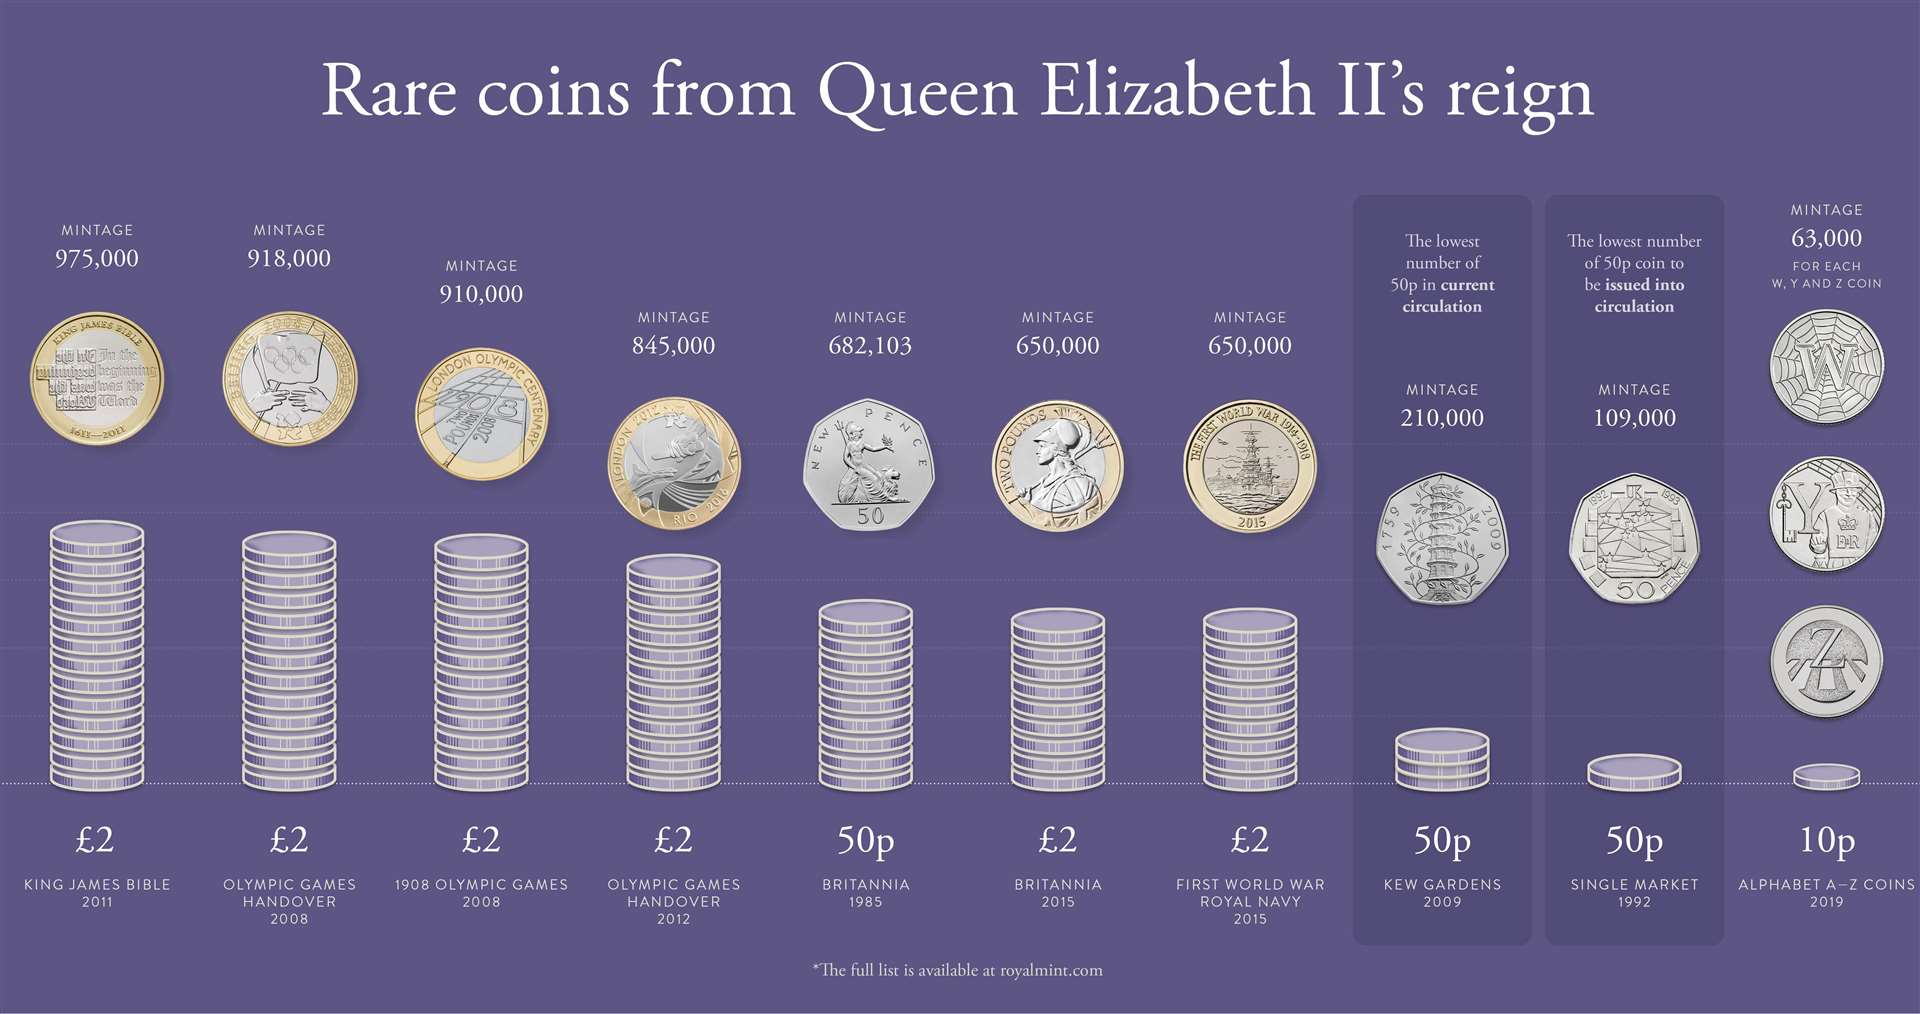 Rare coins from Queen Elizabeth's reign. Image: The Royal Mint.